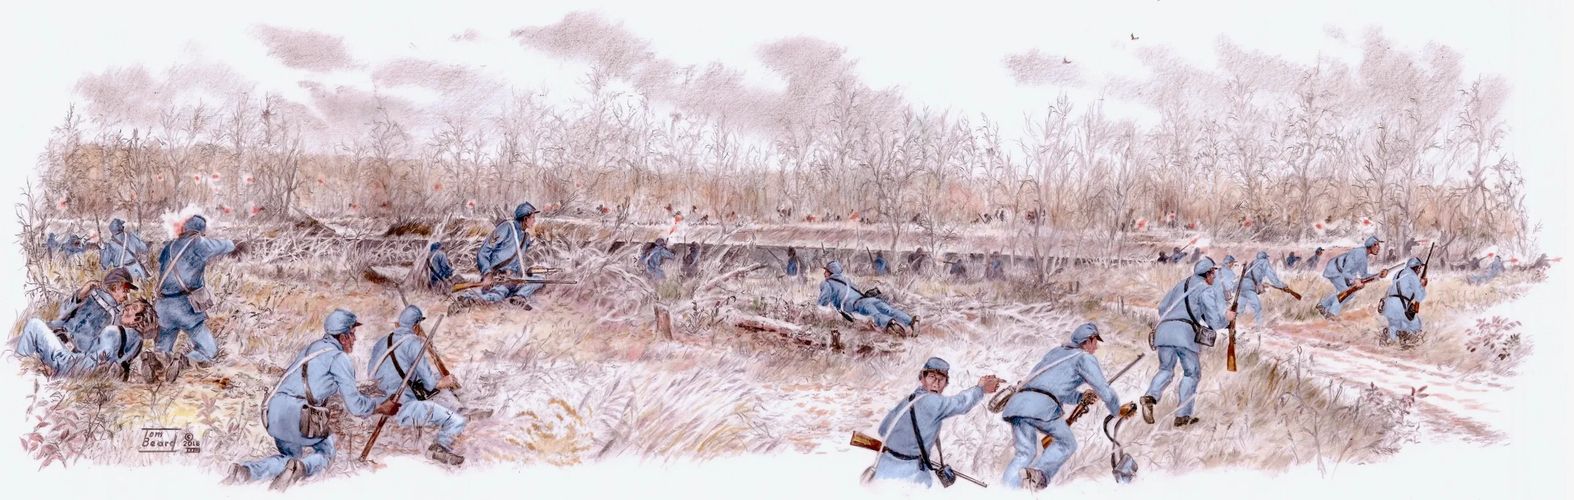 "Storm of Lead" painting by Tom Beard, a scene from October 23, 1864, at Byram's Ford on the Big Blu